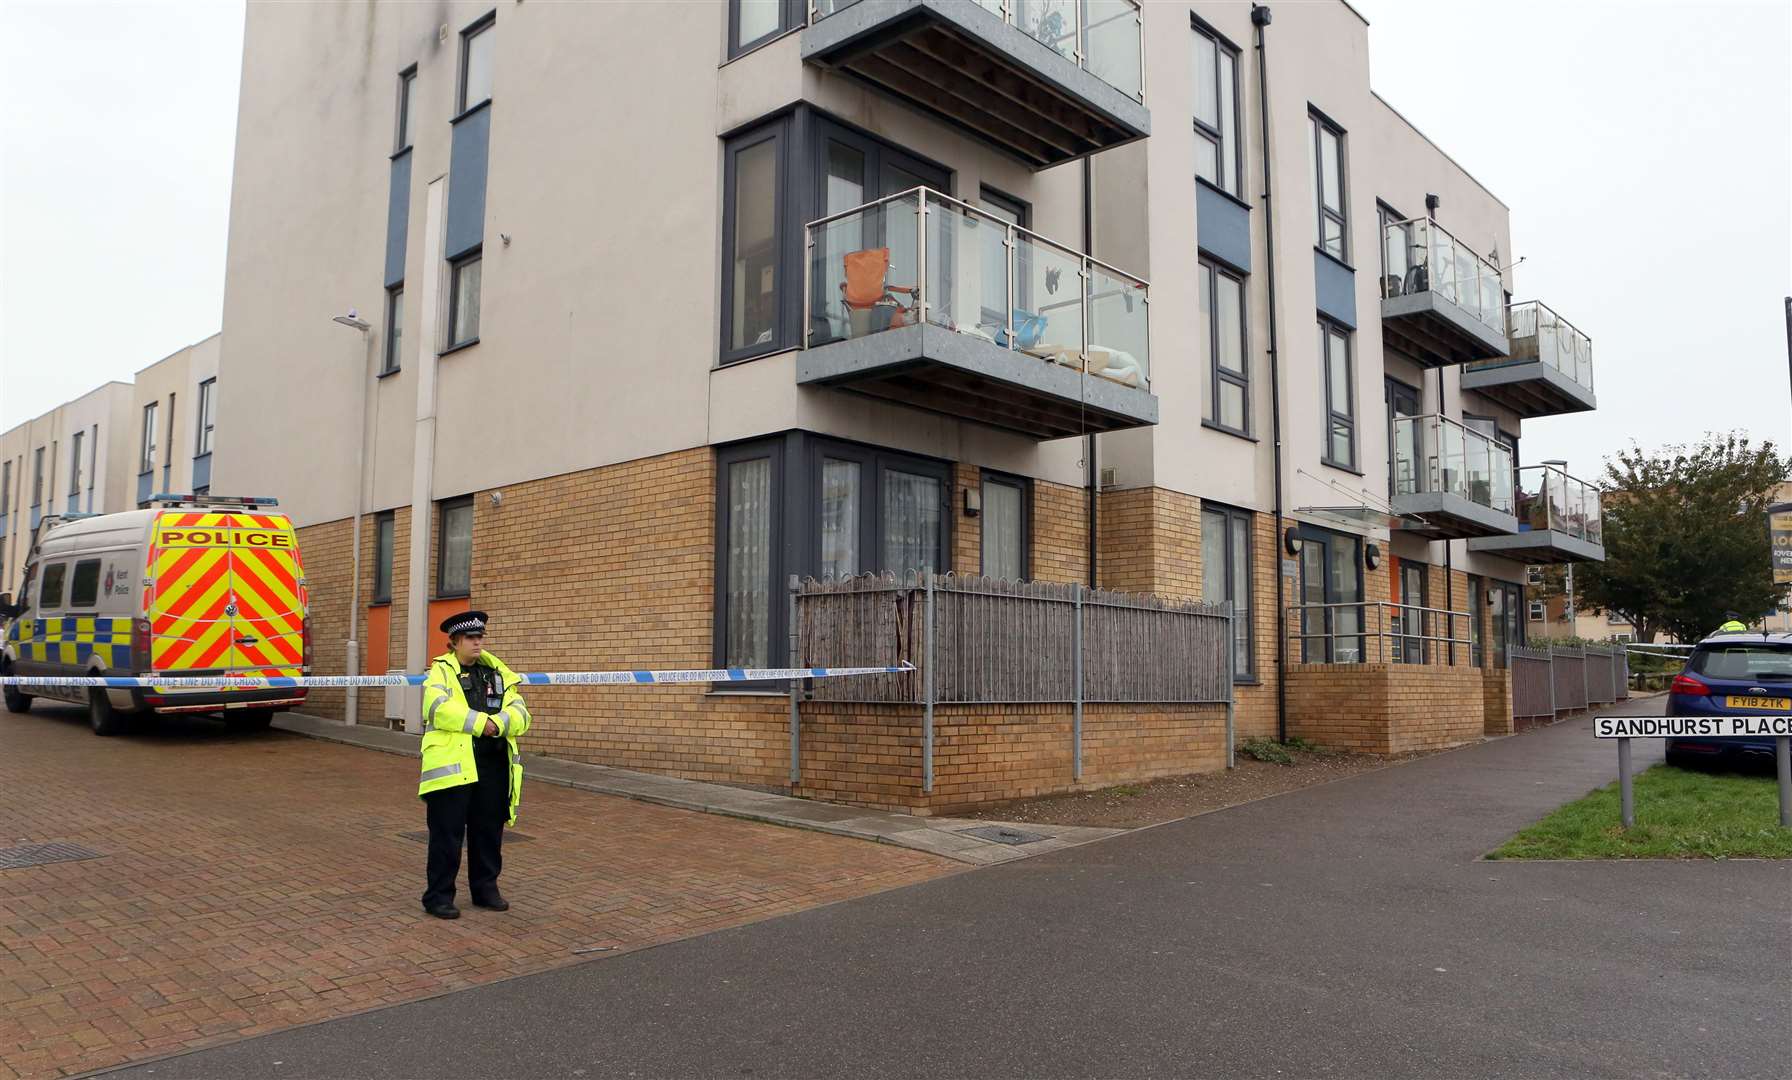 Police and the scene in Sandhurst Place, Margate. Picture: UKNIP